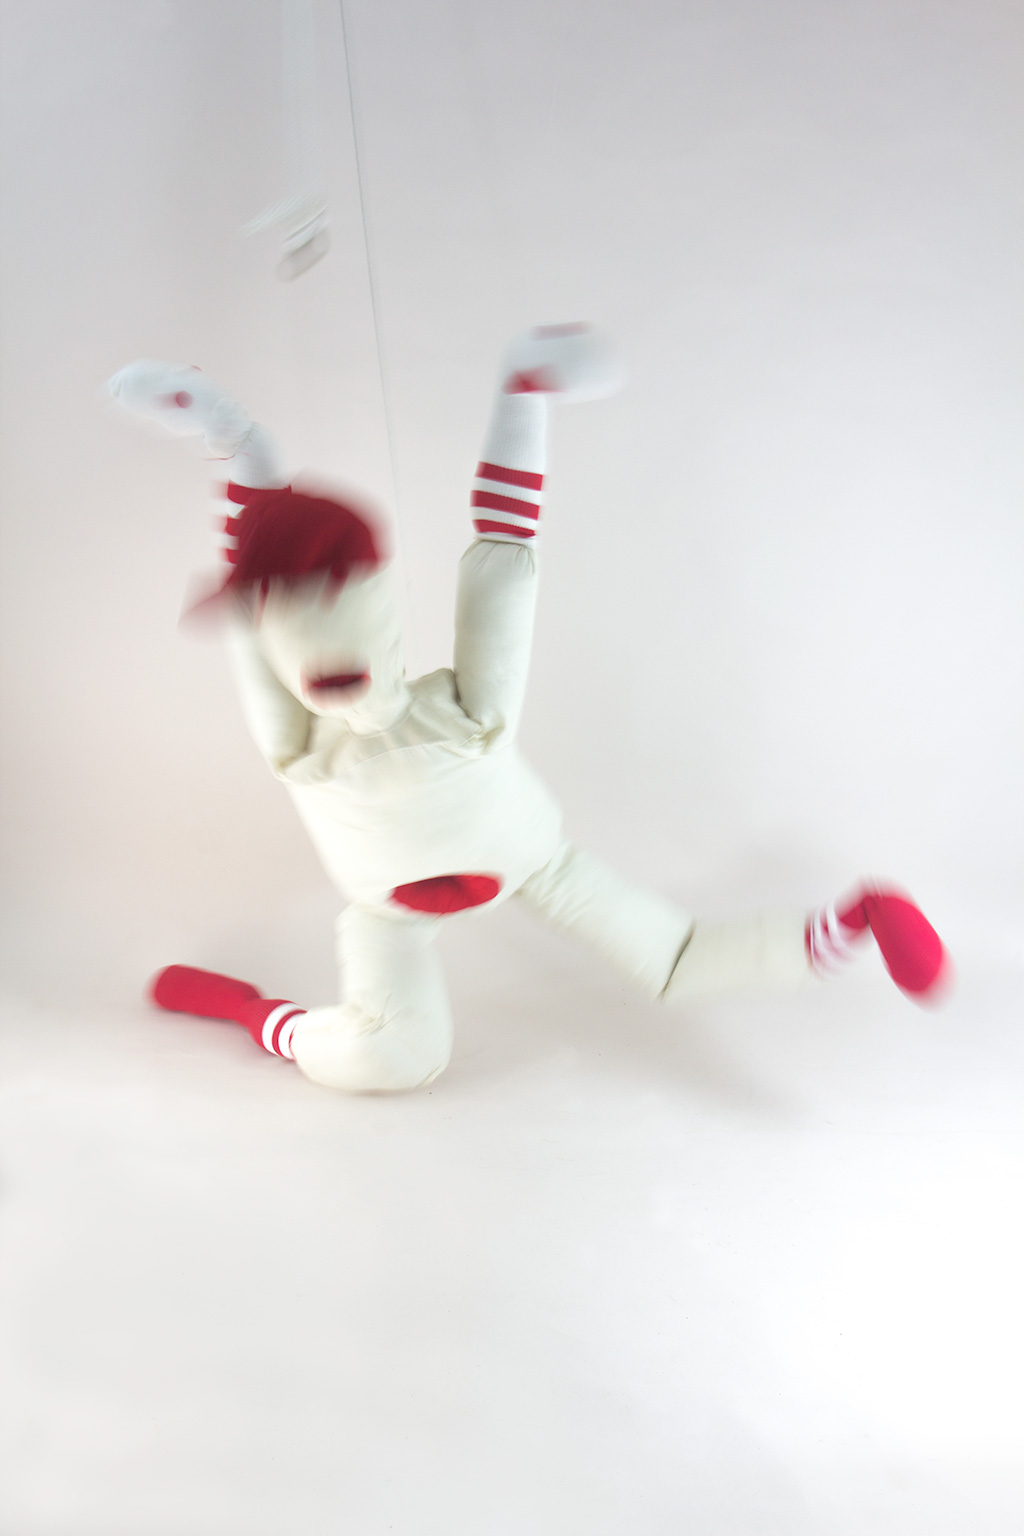 "Hold Up" (Dummy), 2013; digital image projected for C-Print 30"x45".